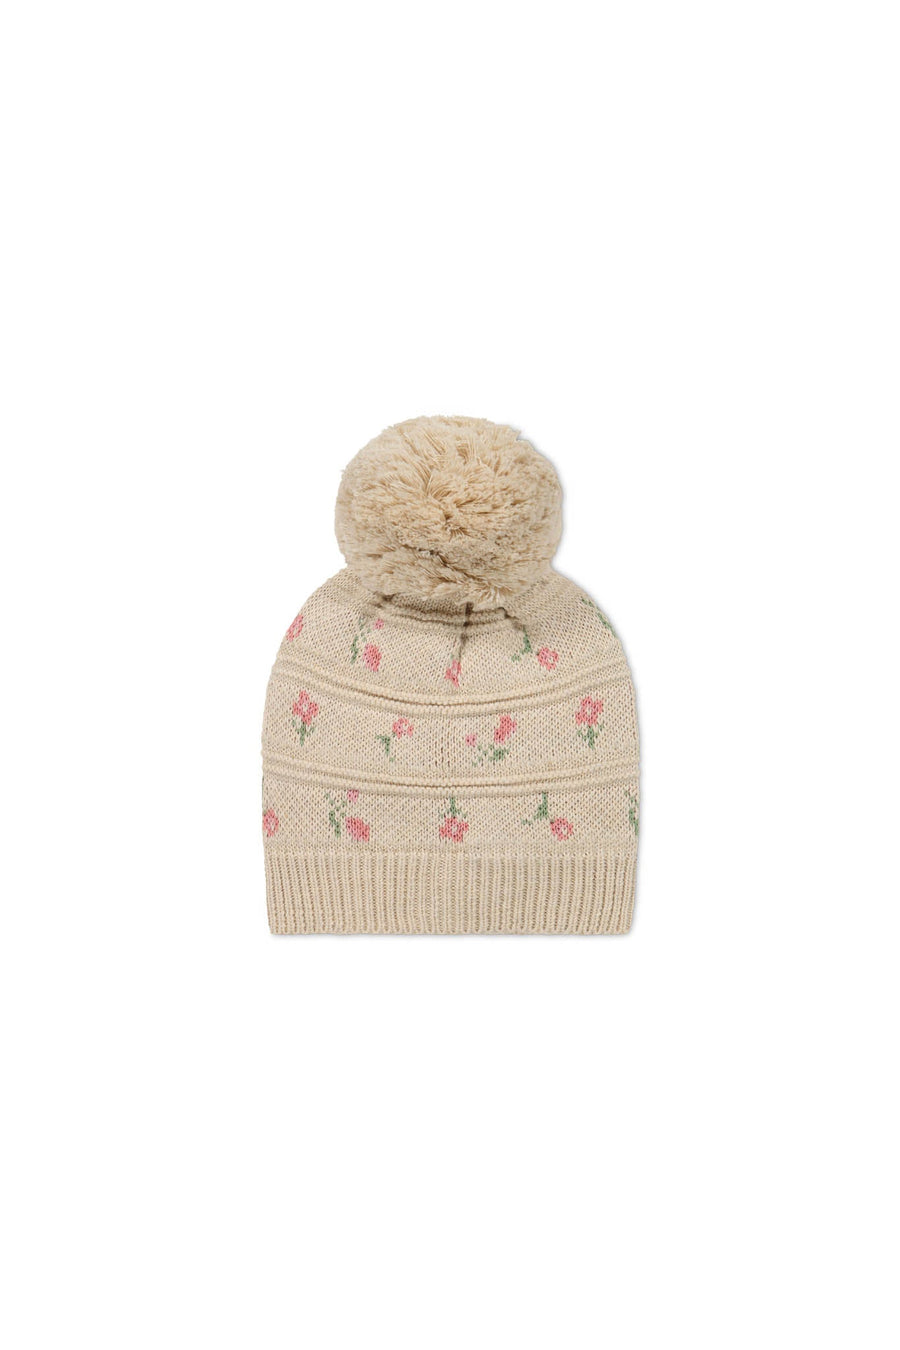 Delilah Knitted Hat - Delilah Jacquard Oatmeal Marle Childrens Hat from Jamie Kay USA